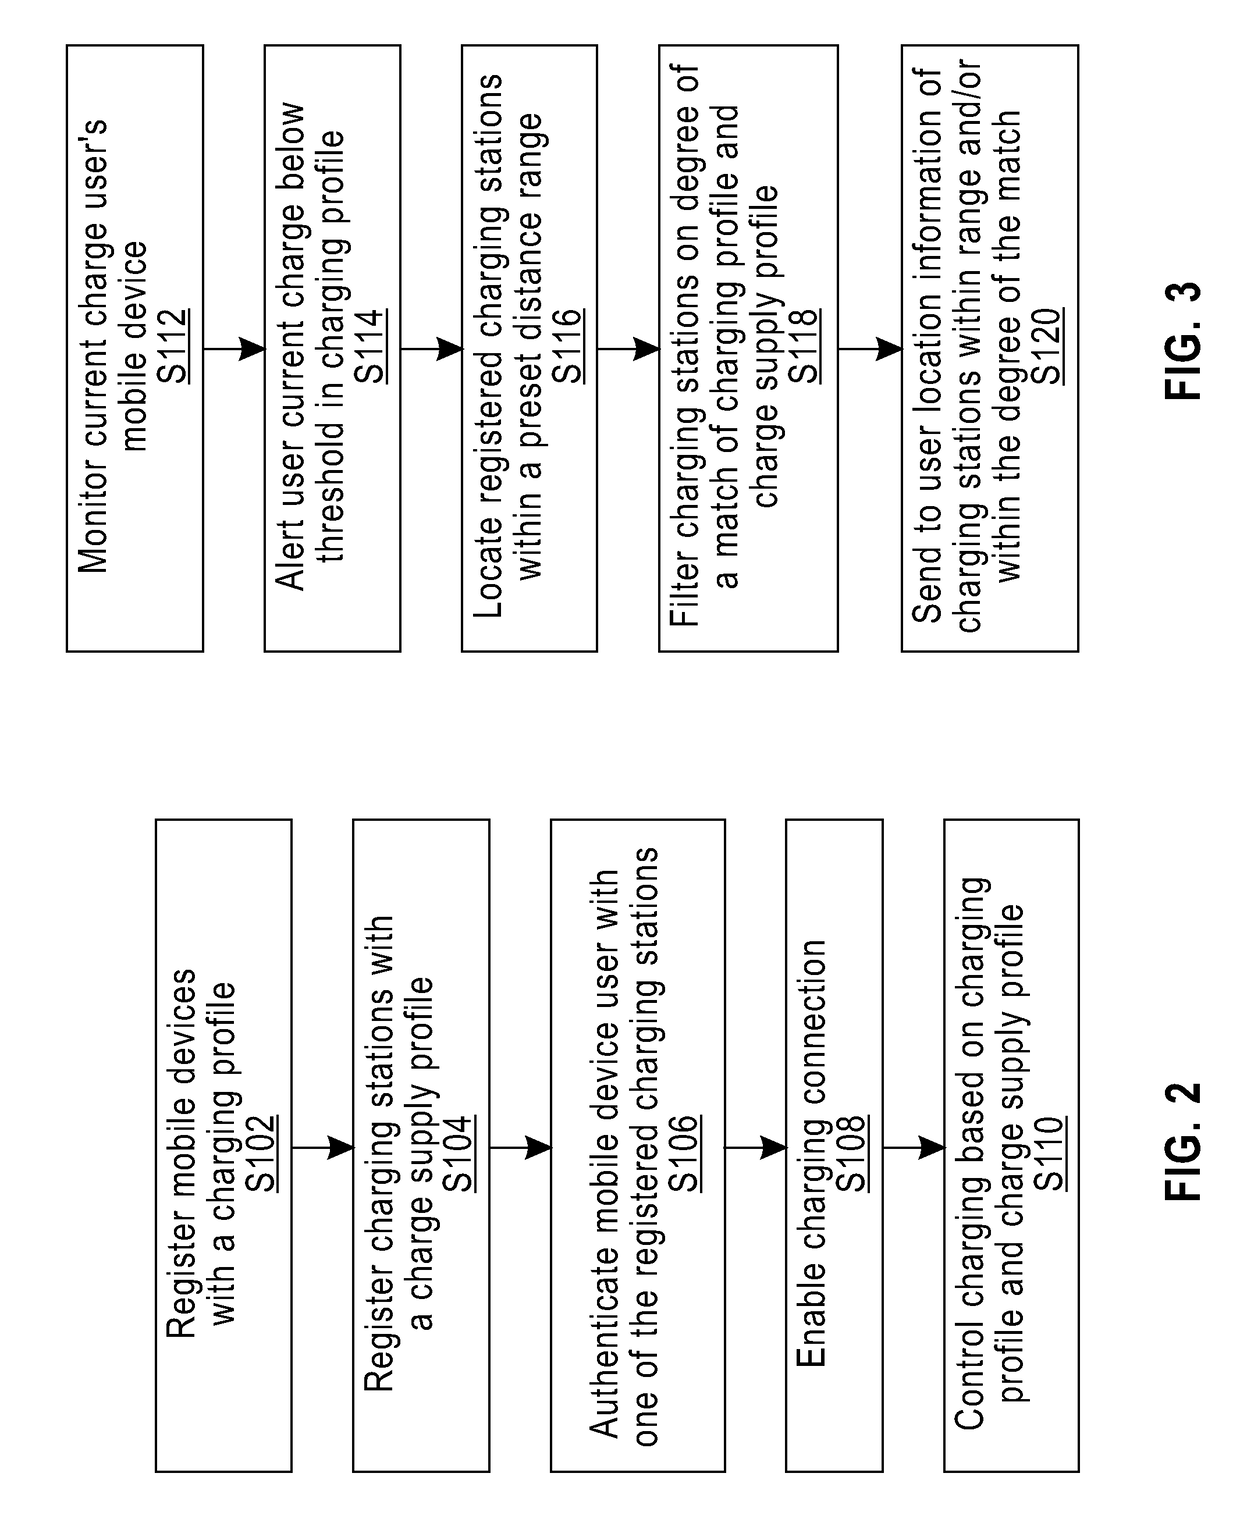 System for charging mobile device using an ad-hoc infrastructure with energy harvesting capabilities